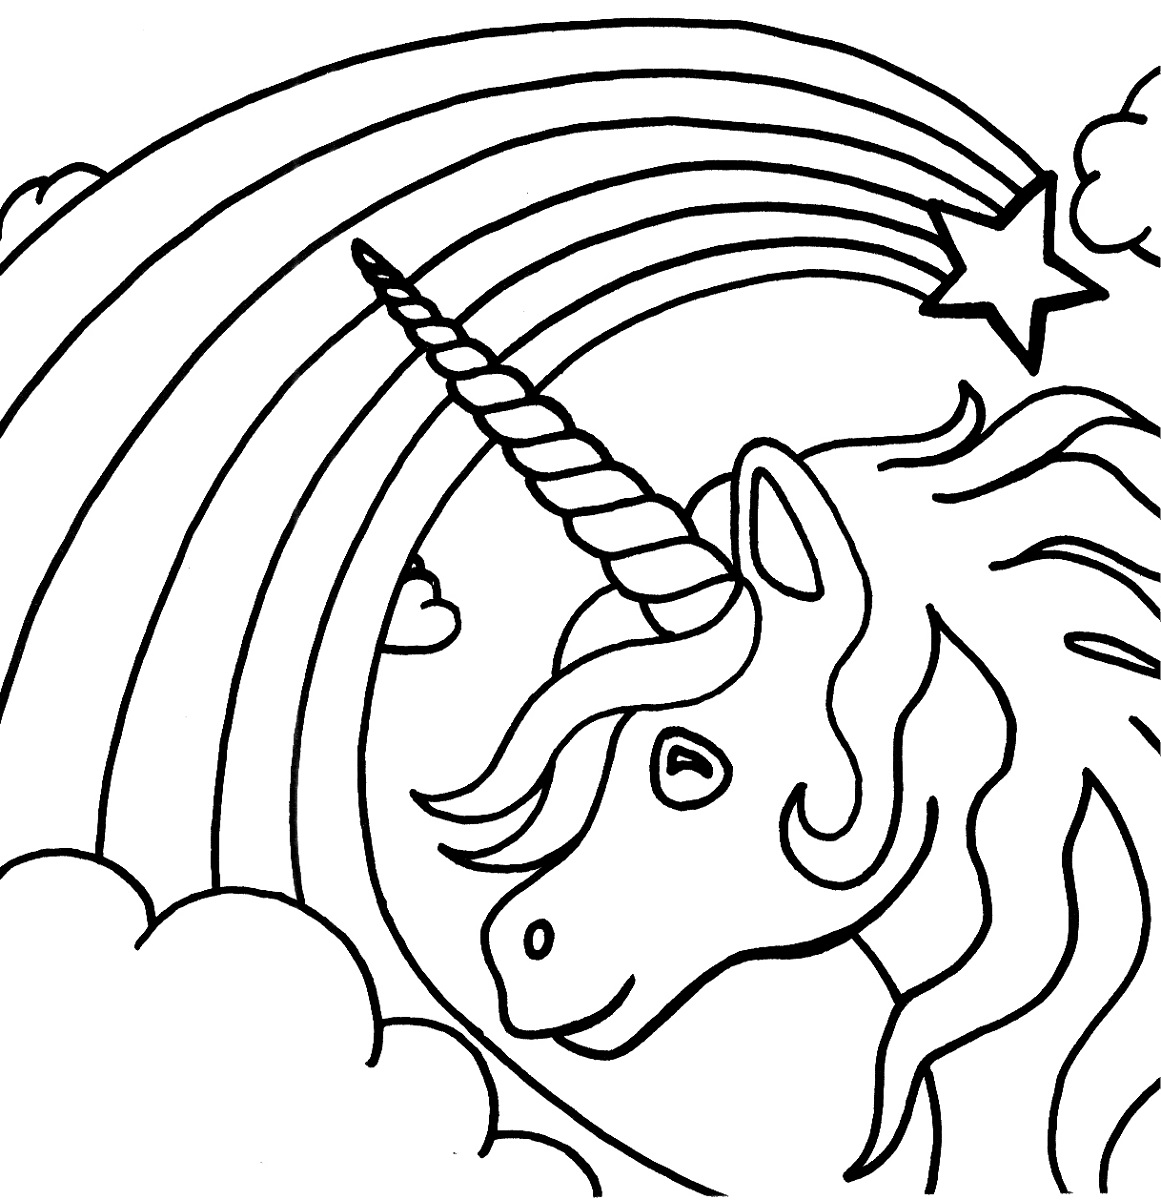 Unicorn Rainbow Coloring Pages At GetColorings Free Printable Colorings Pages To Print And